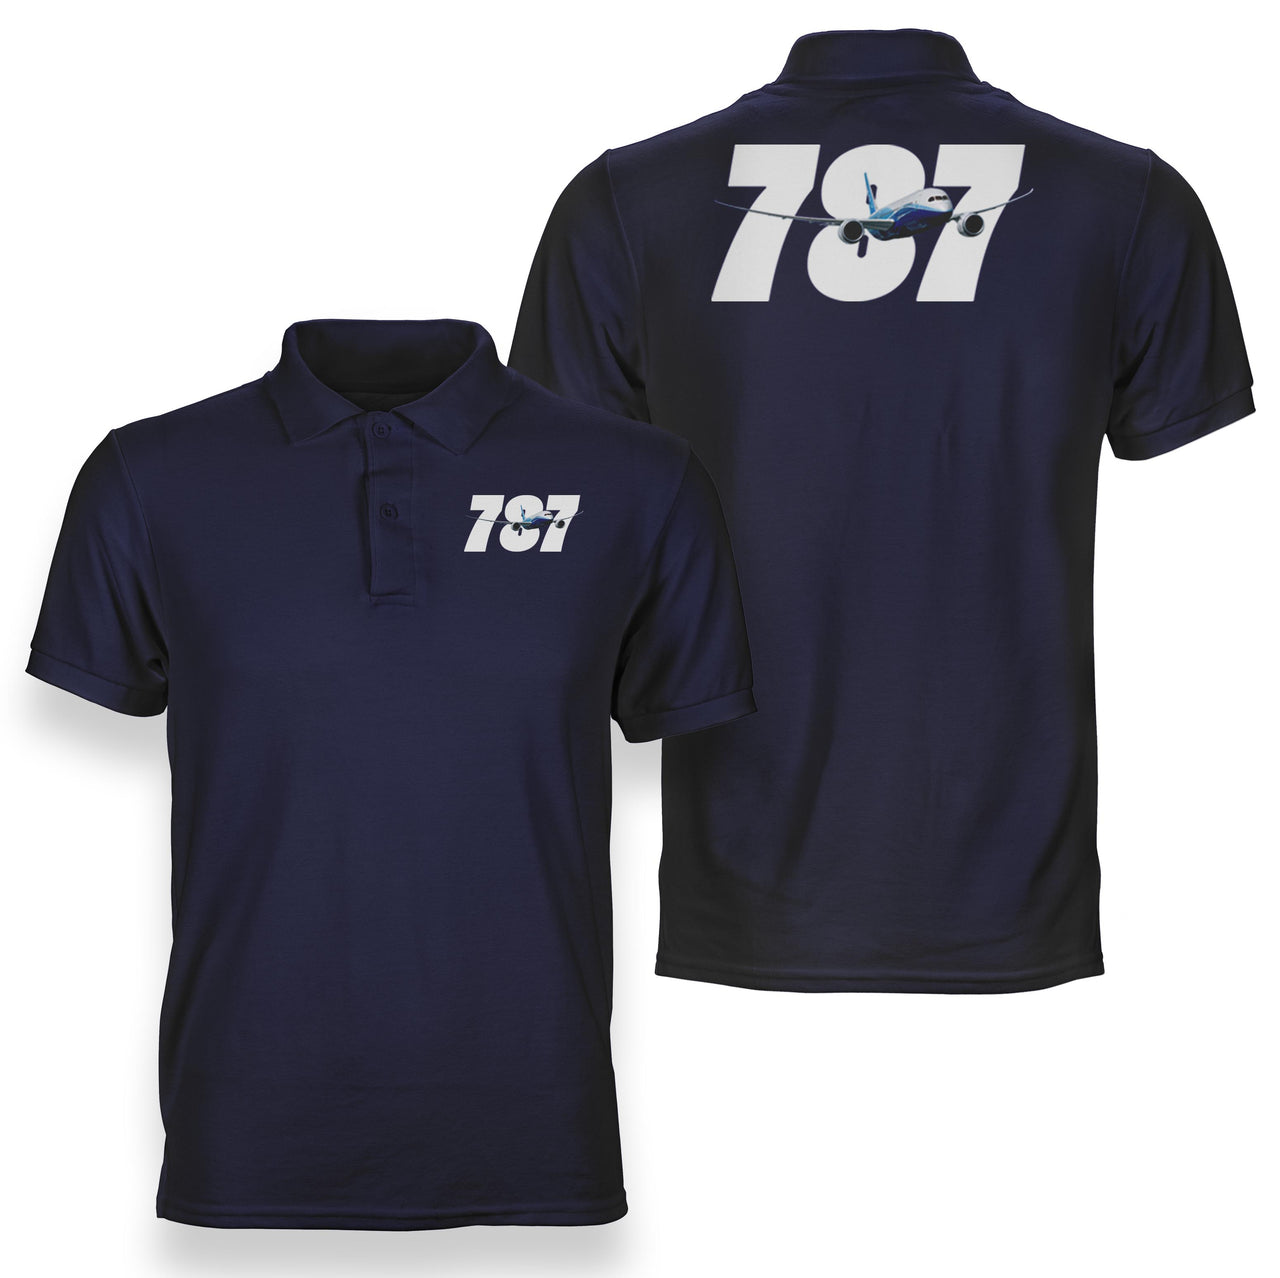 Super Boeing 787 Designed Double Side Polo T-Shirts